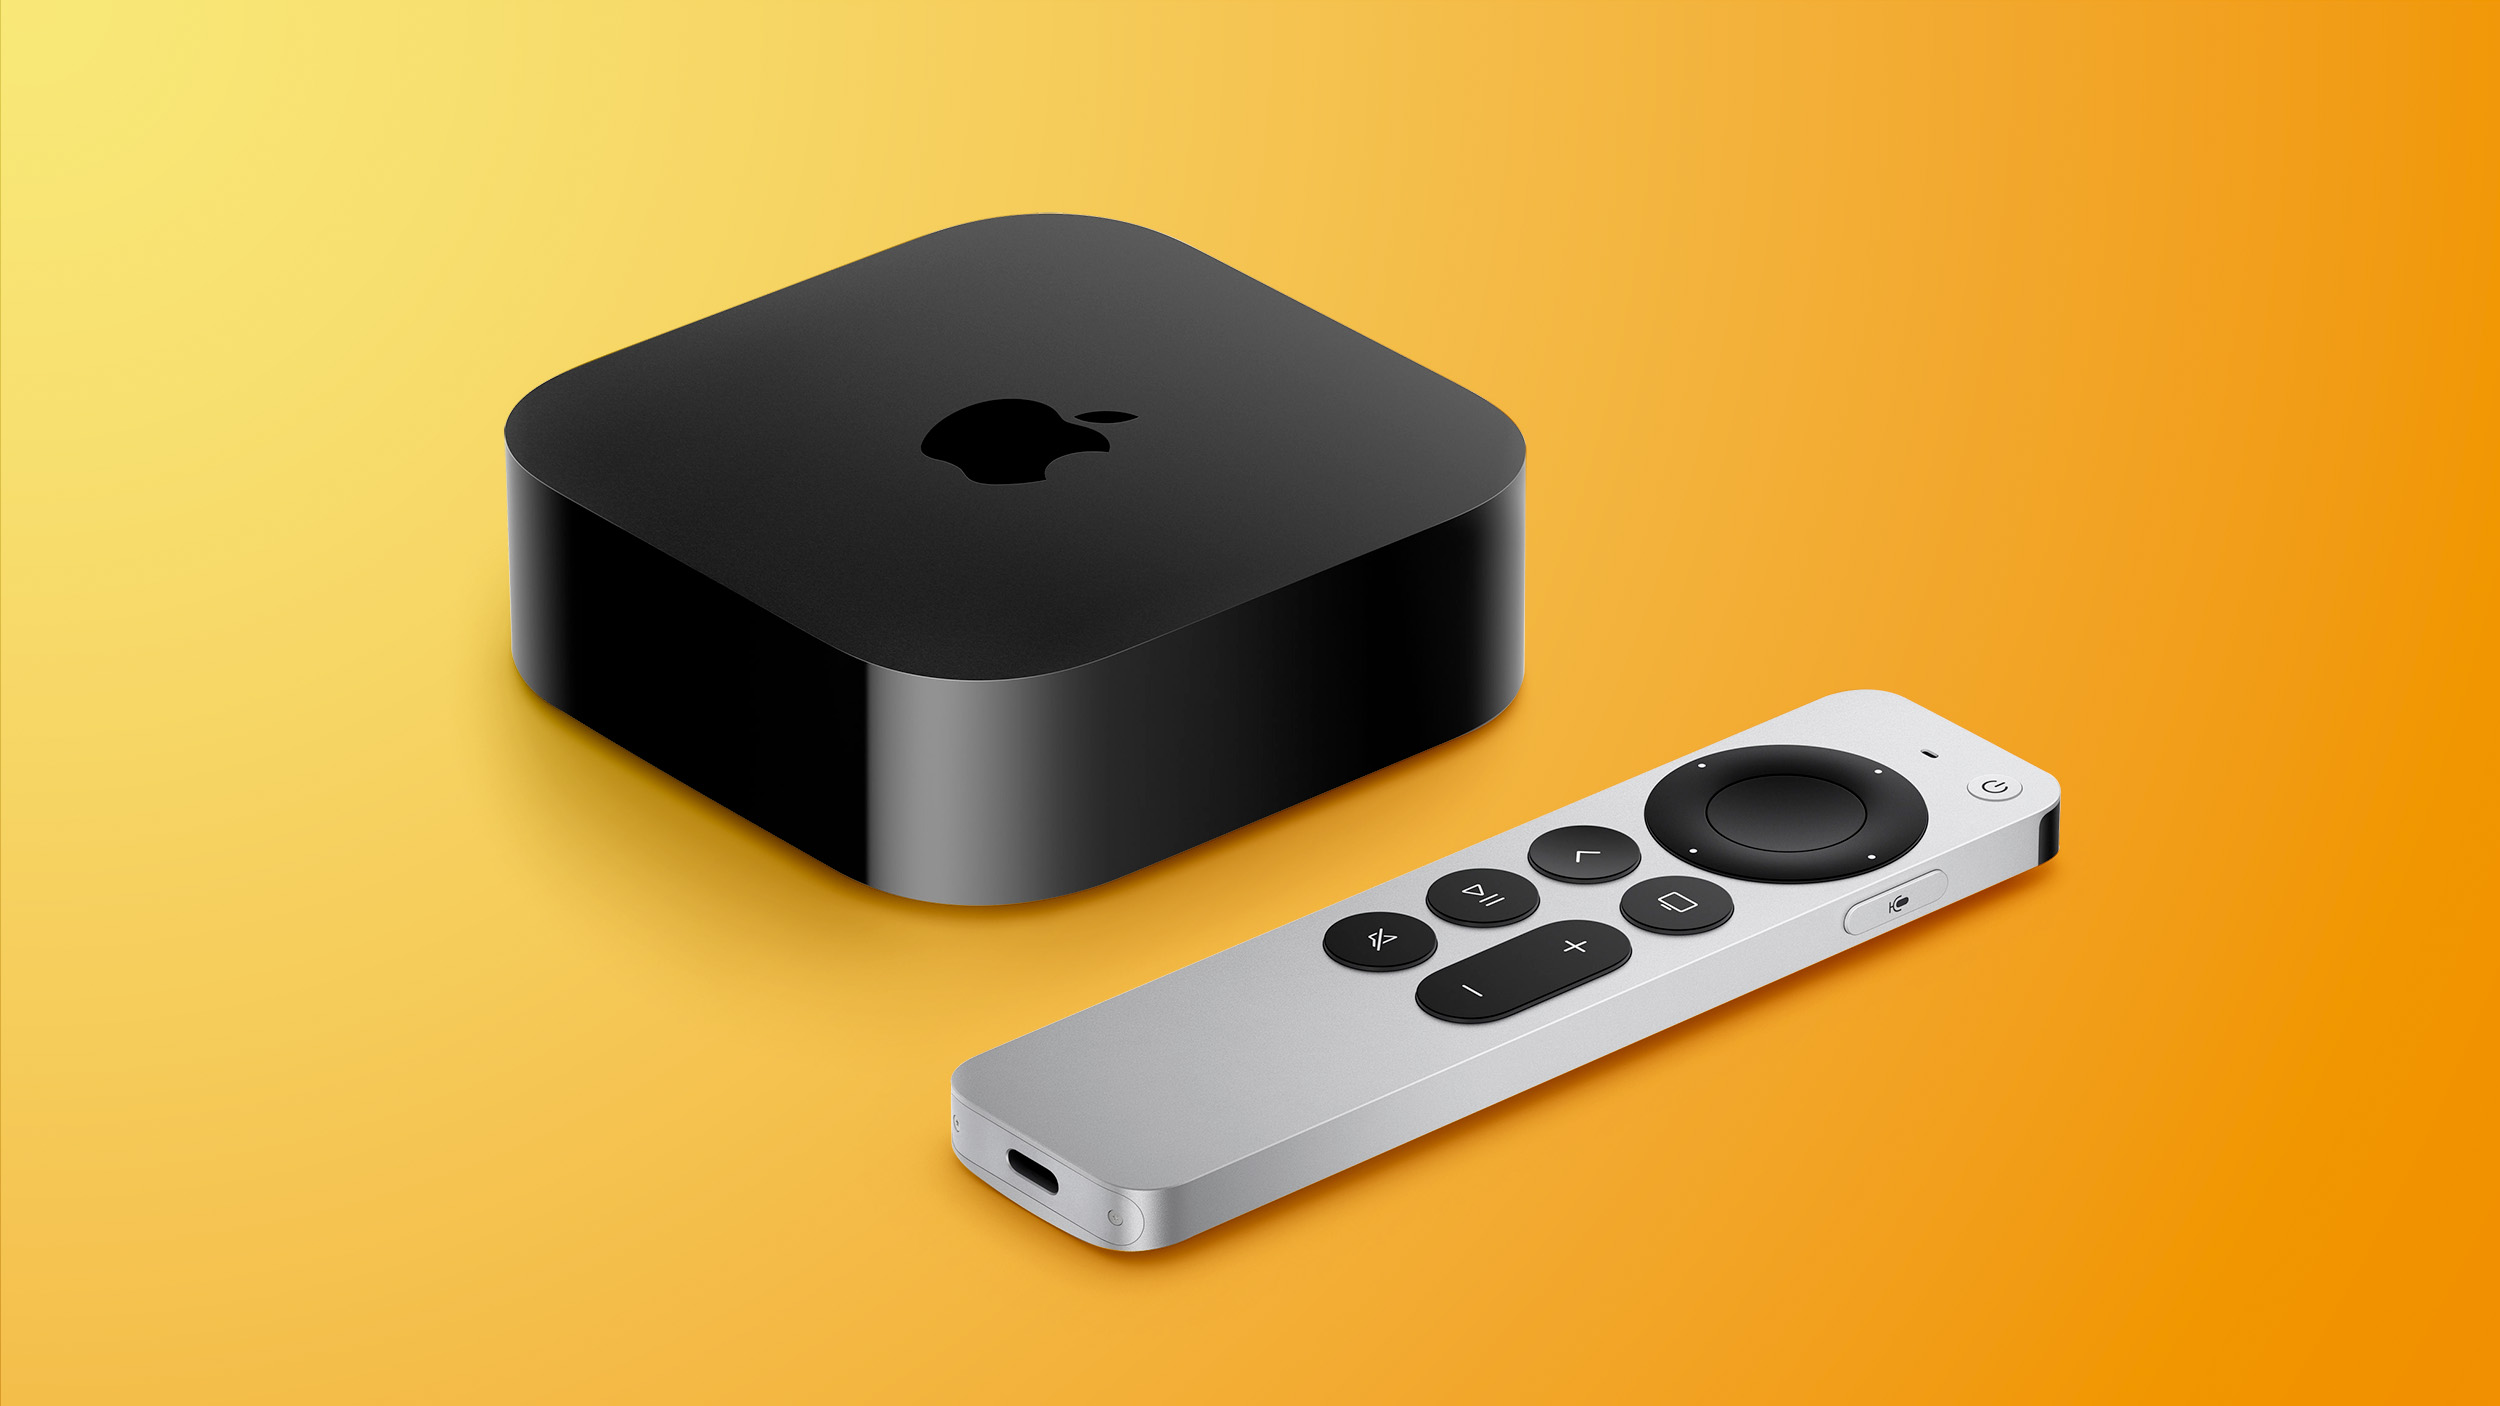 Amazon Launches First Pre-Order Discount on New Apple TV 4K at $124.99